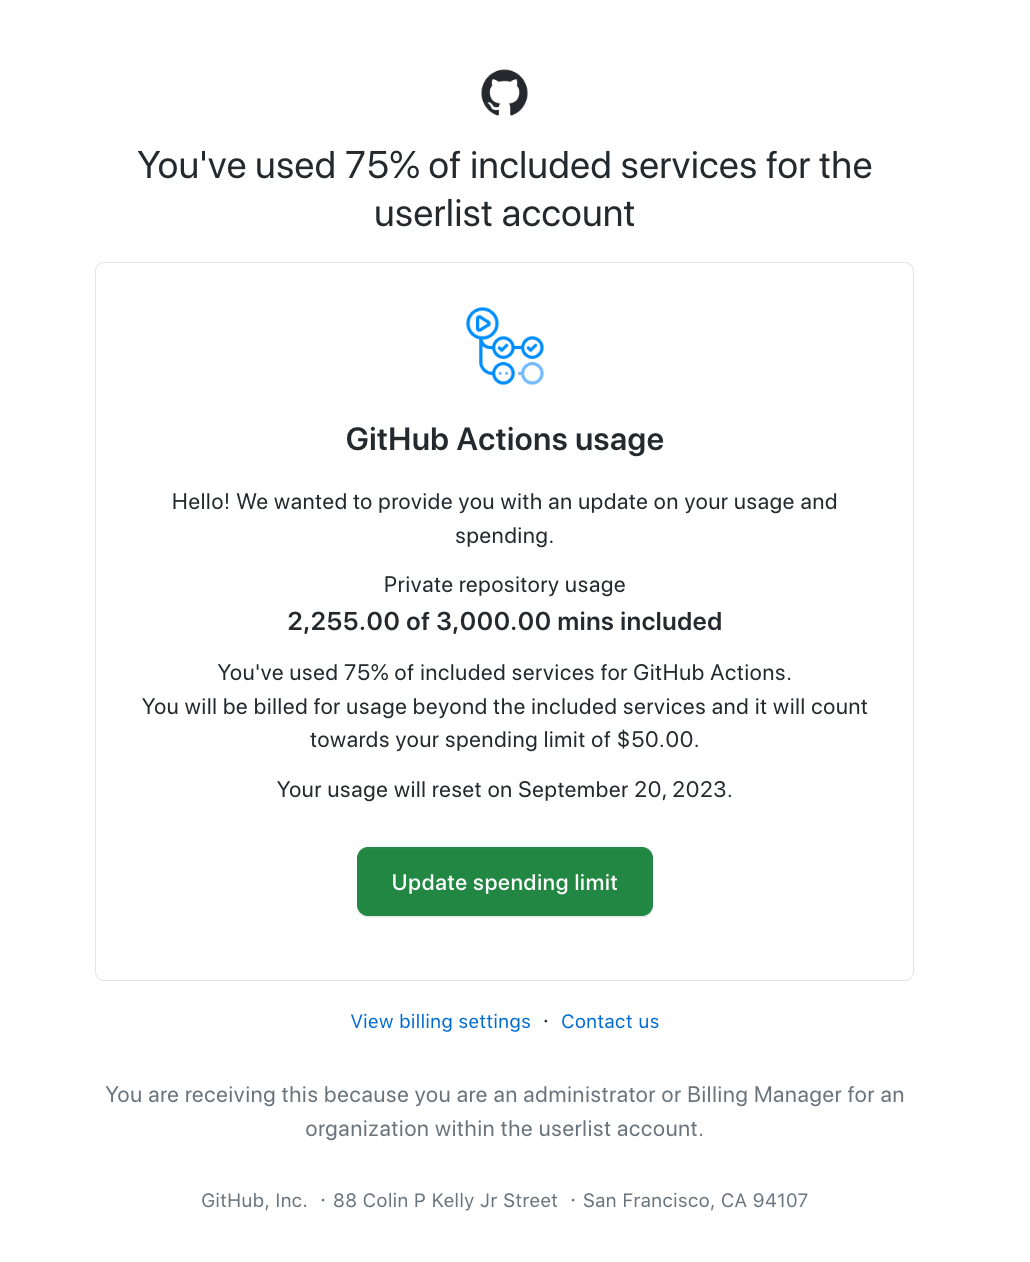 Email Marketing for Devtools: Screenshot of GitHub's email featuring usage reports